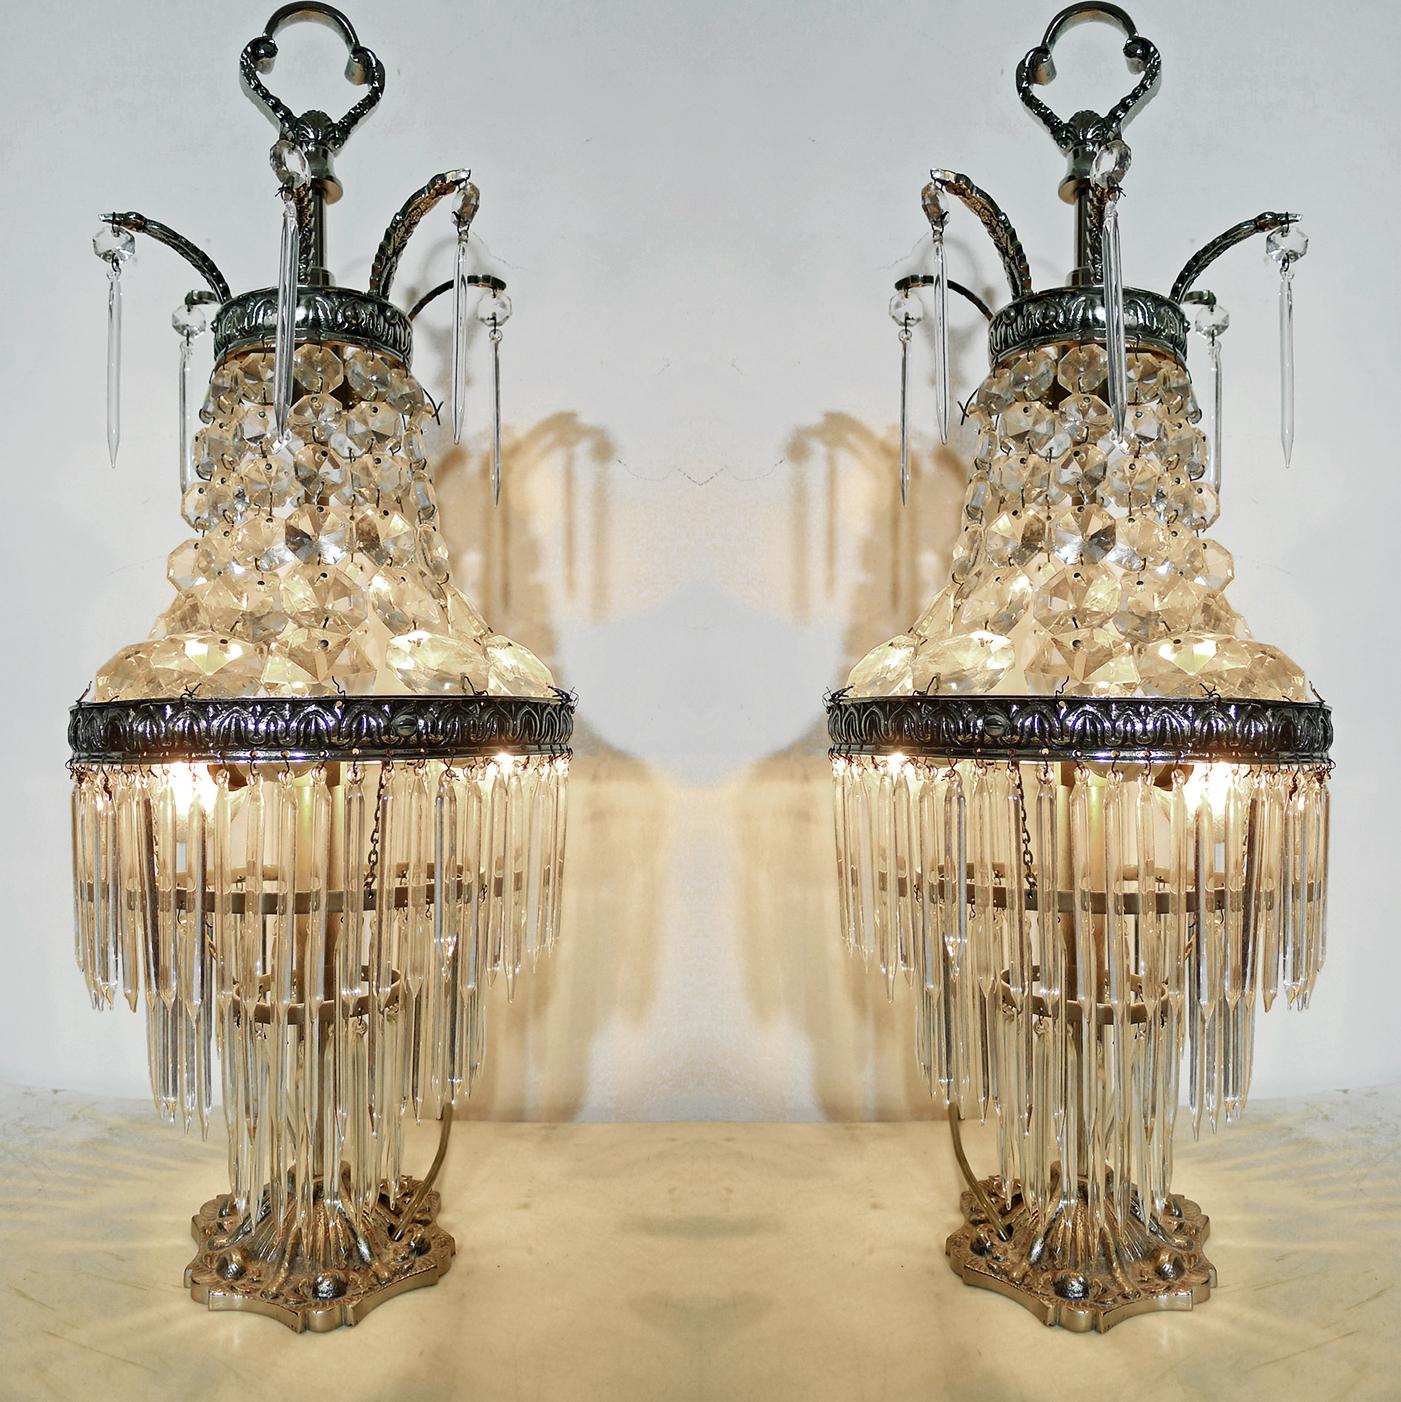 Pair of French Hollywood Regency Empire Silver Nickel & Crystal Table Lamps 1920 In Good Condition For Sale In Coimbra, PT